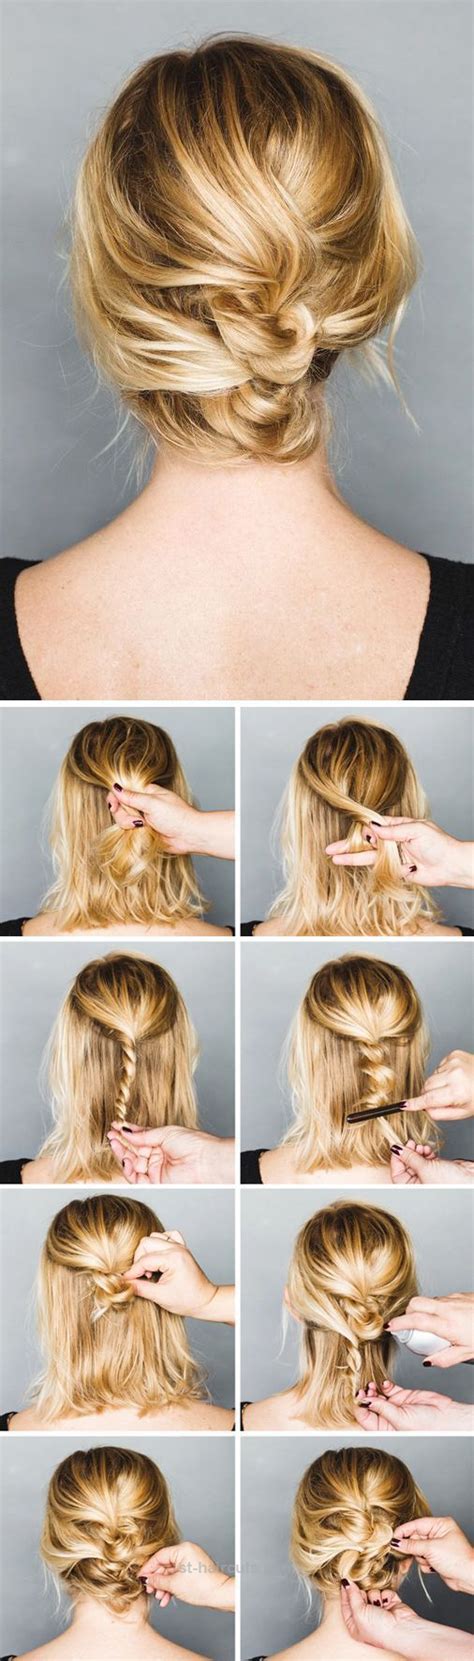 25 Step By Step Tutorial For Beautiful Hair Updos Page 5 Of 5 Trend To W St Haircuts